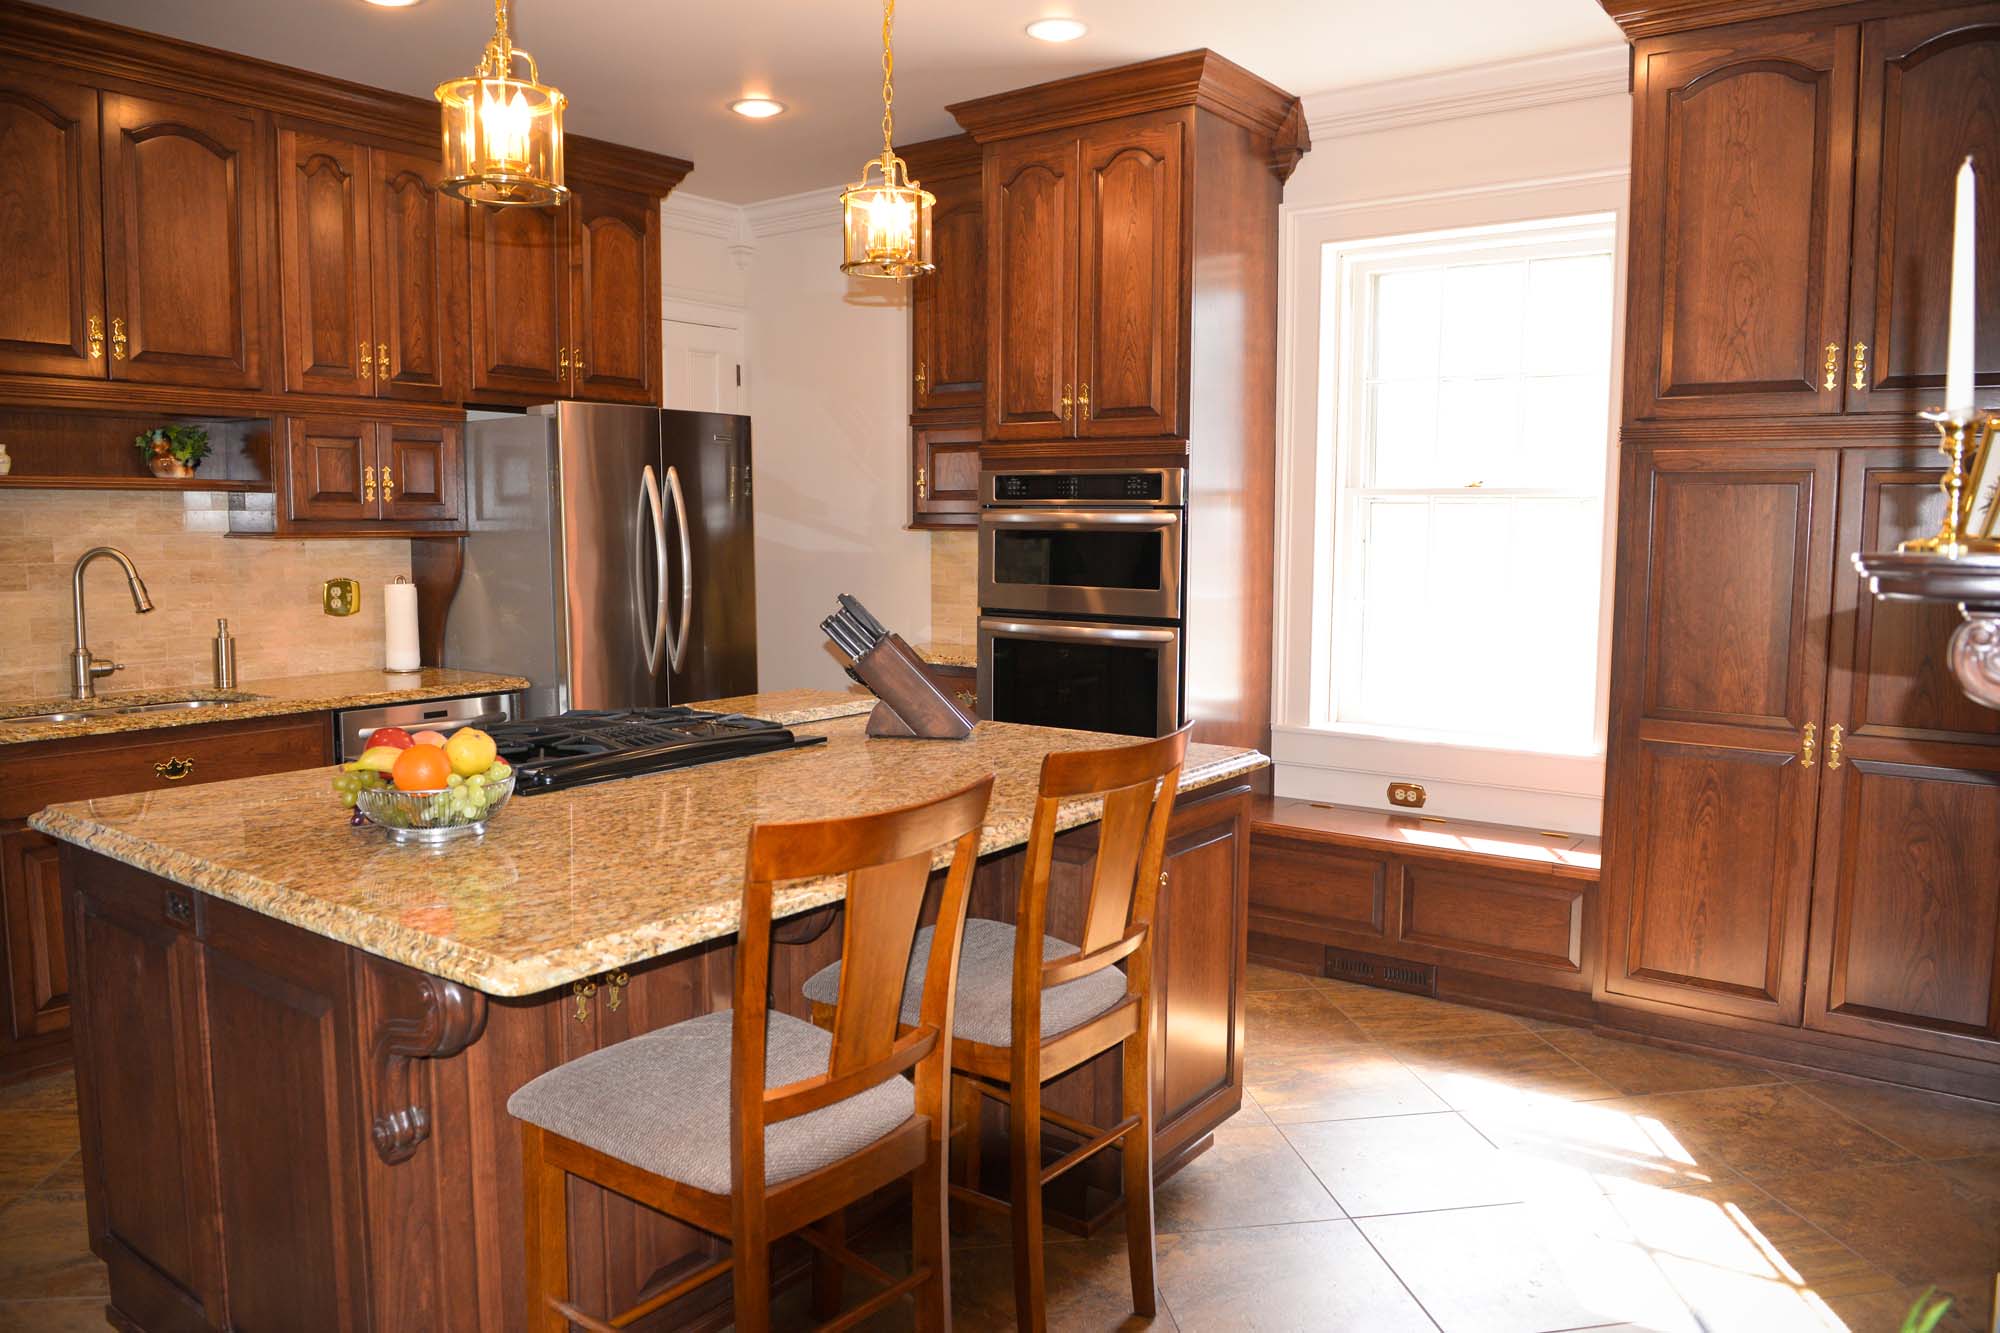 About HW Custom Kitchens, Inc.